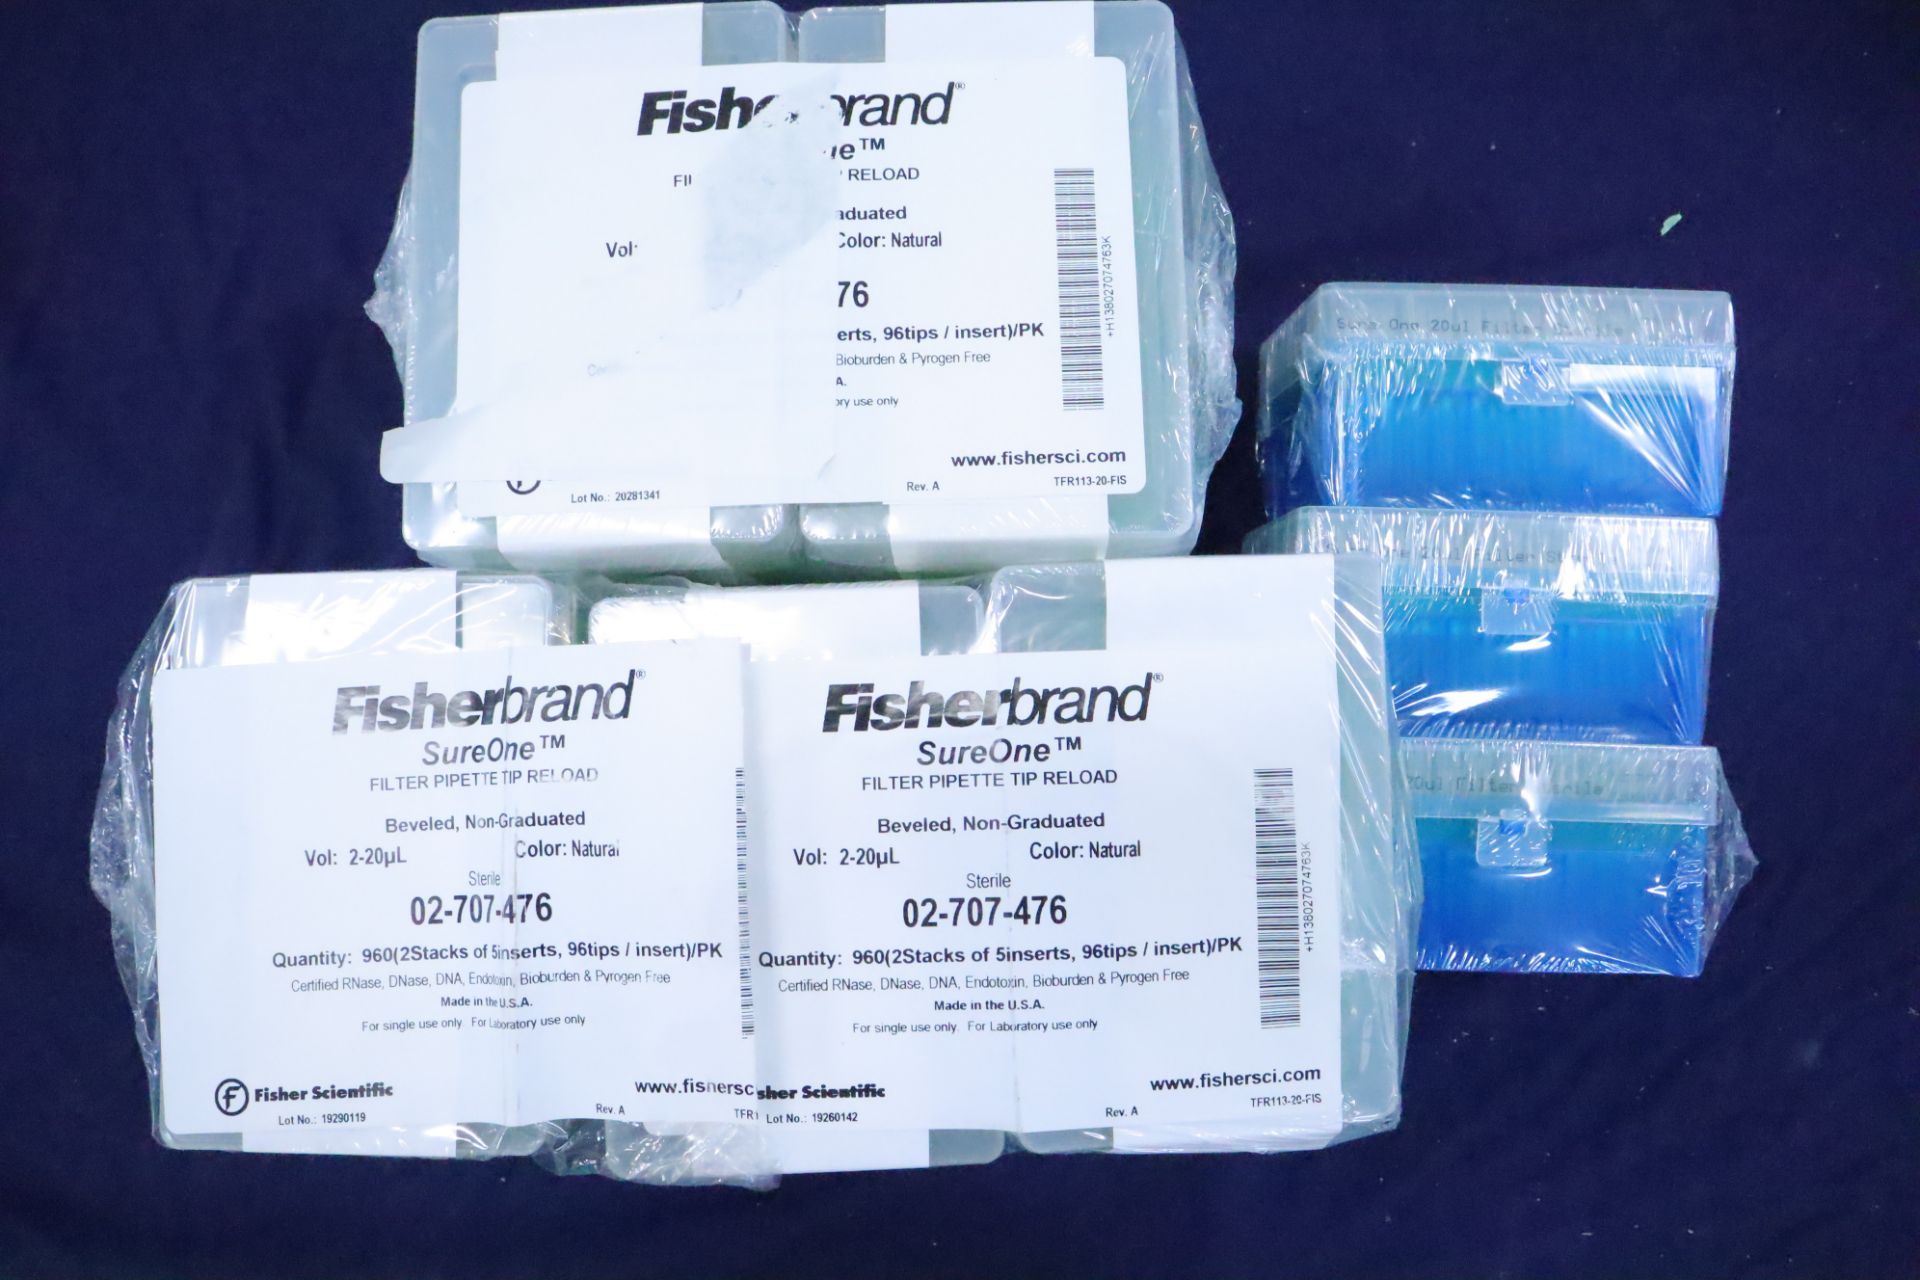 Fisherbrand SureOne Pipette Tip Racks (Empty/Partial Empty), Racked (NIB), & Filter Tip Reload (OBN) - Image 2 of 7